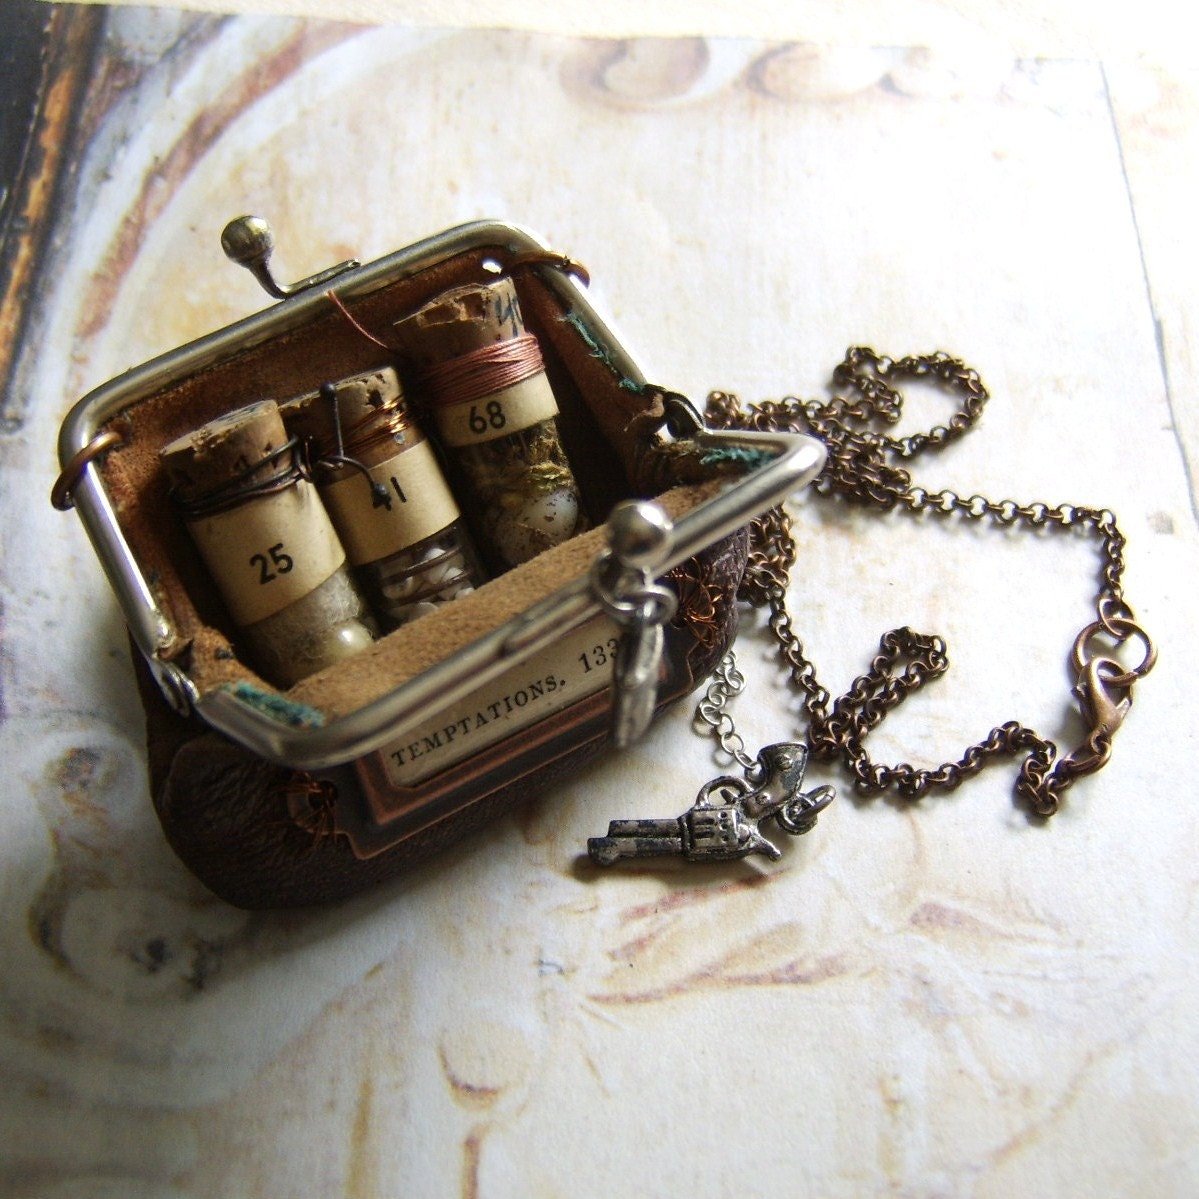 Temptations - Steampunk Assemblage Necklace or Curiosity